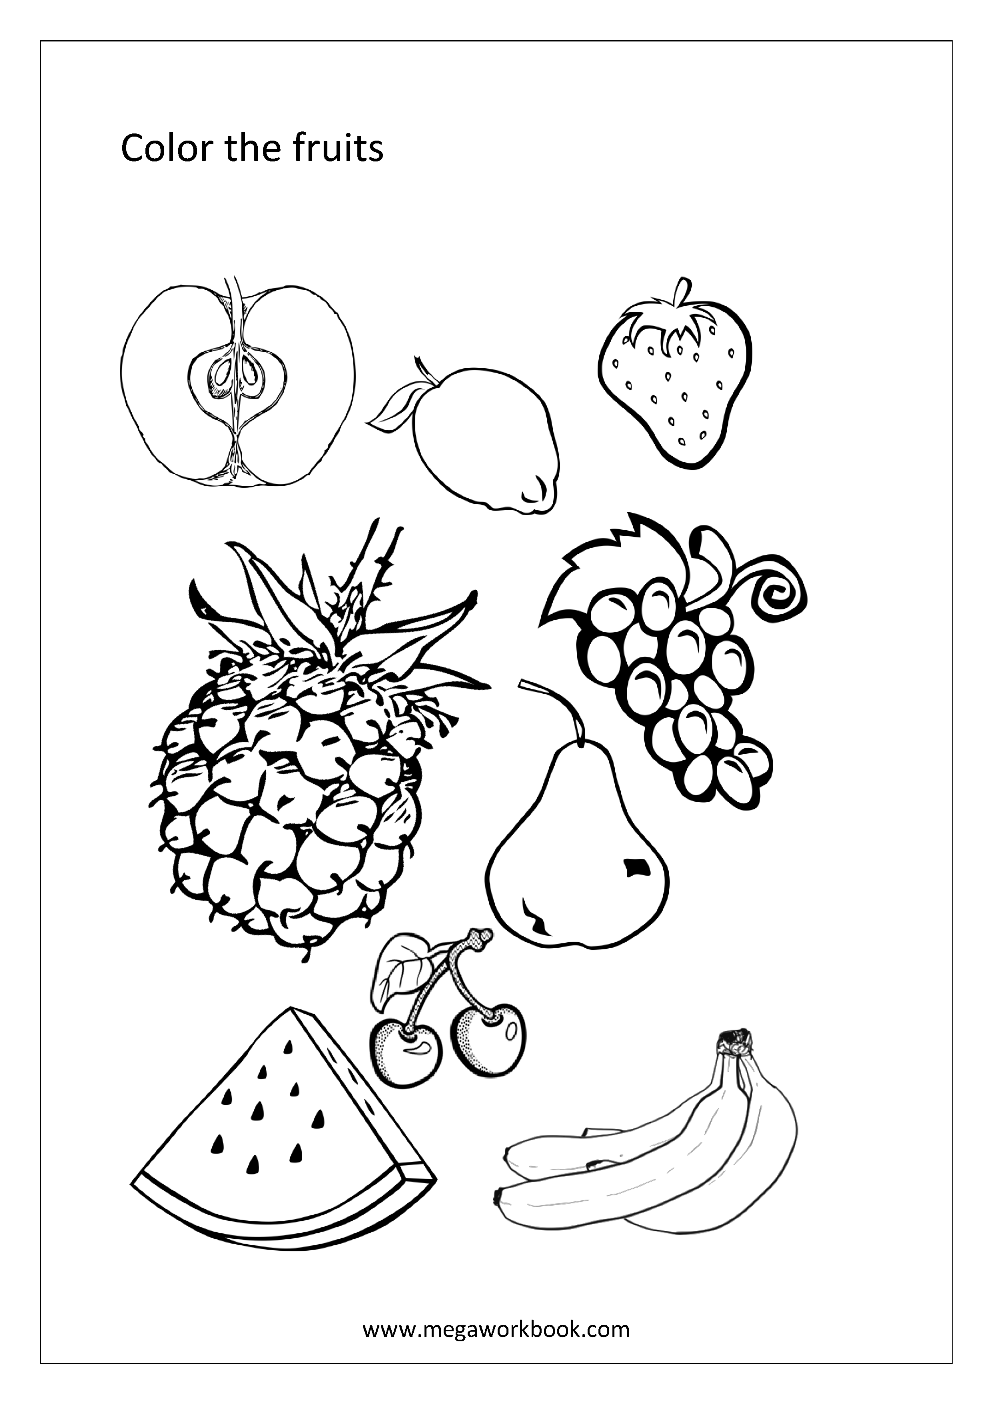 Fruit Coloring Pages - Vegetable Coloring Pages - Food Coloring Pages